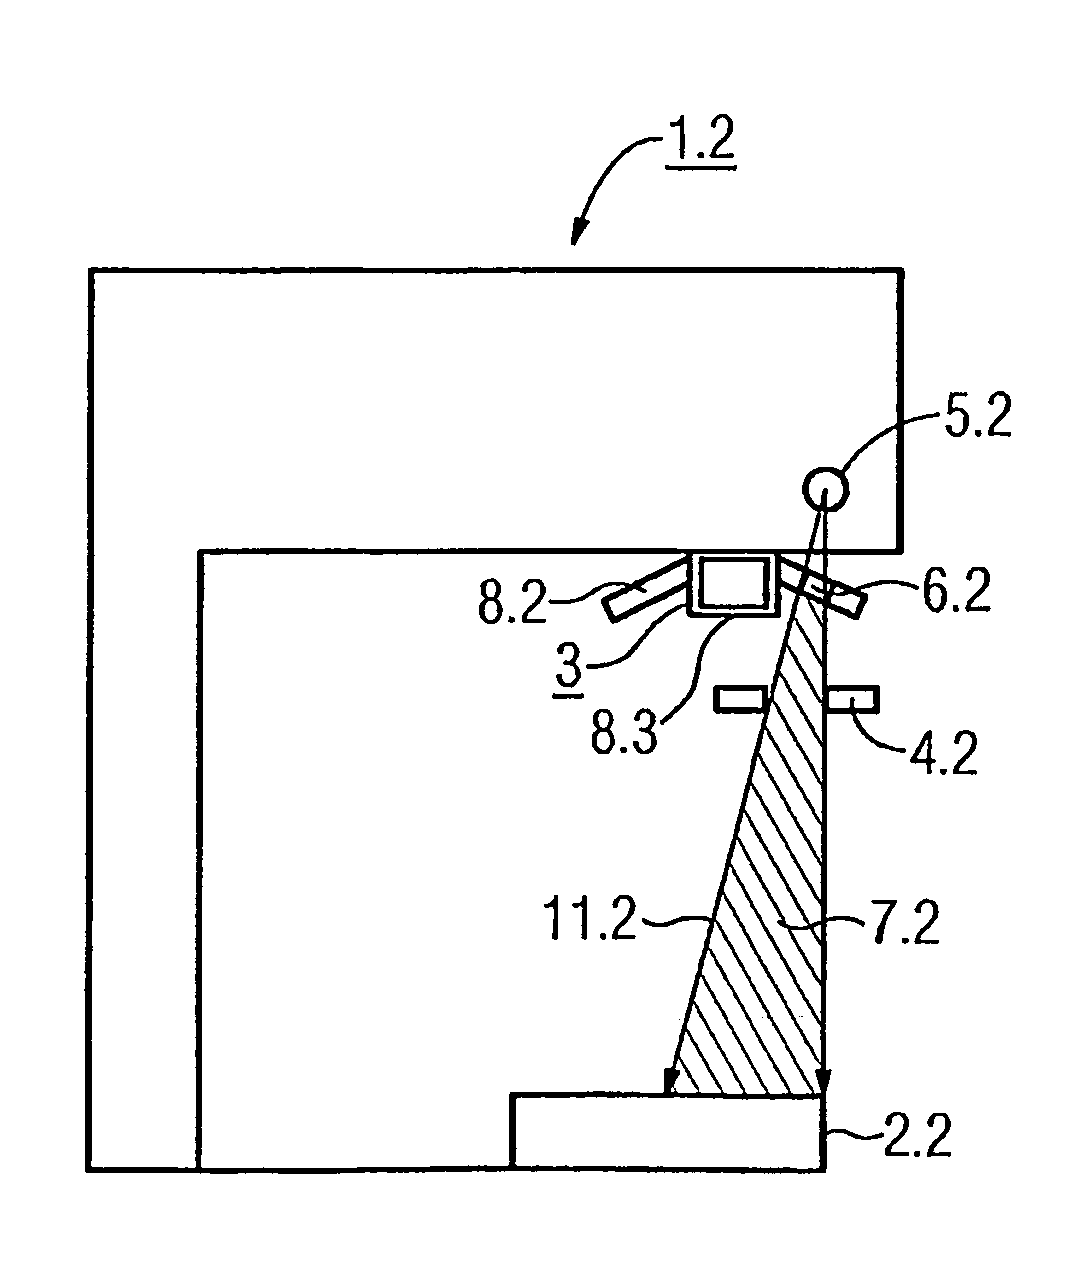 X-ray apparatus and mammographic x-ray apparatus with an indicator